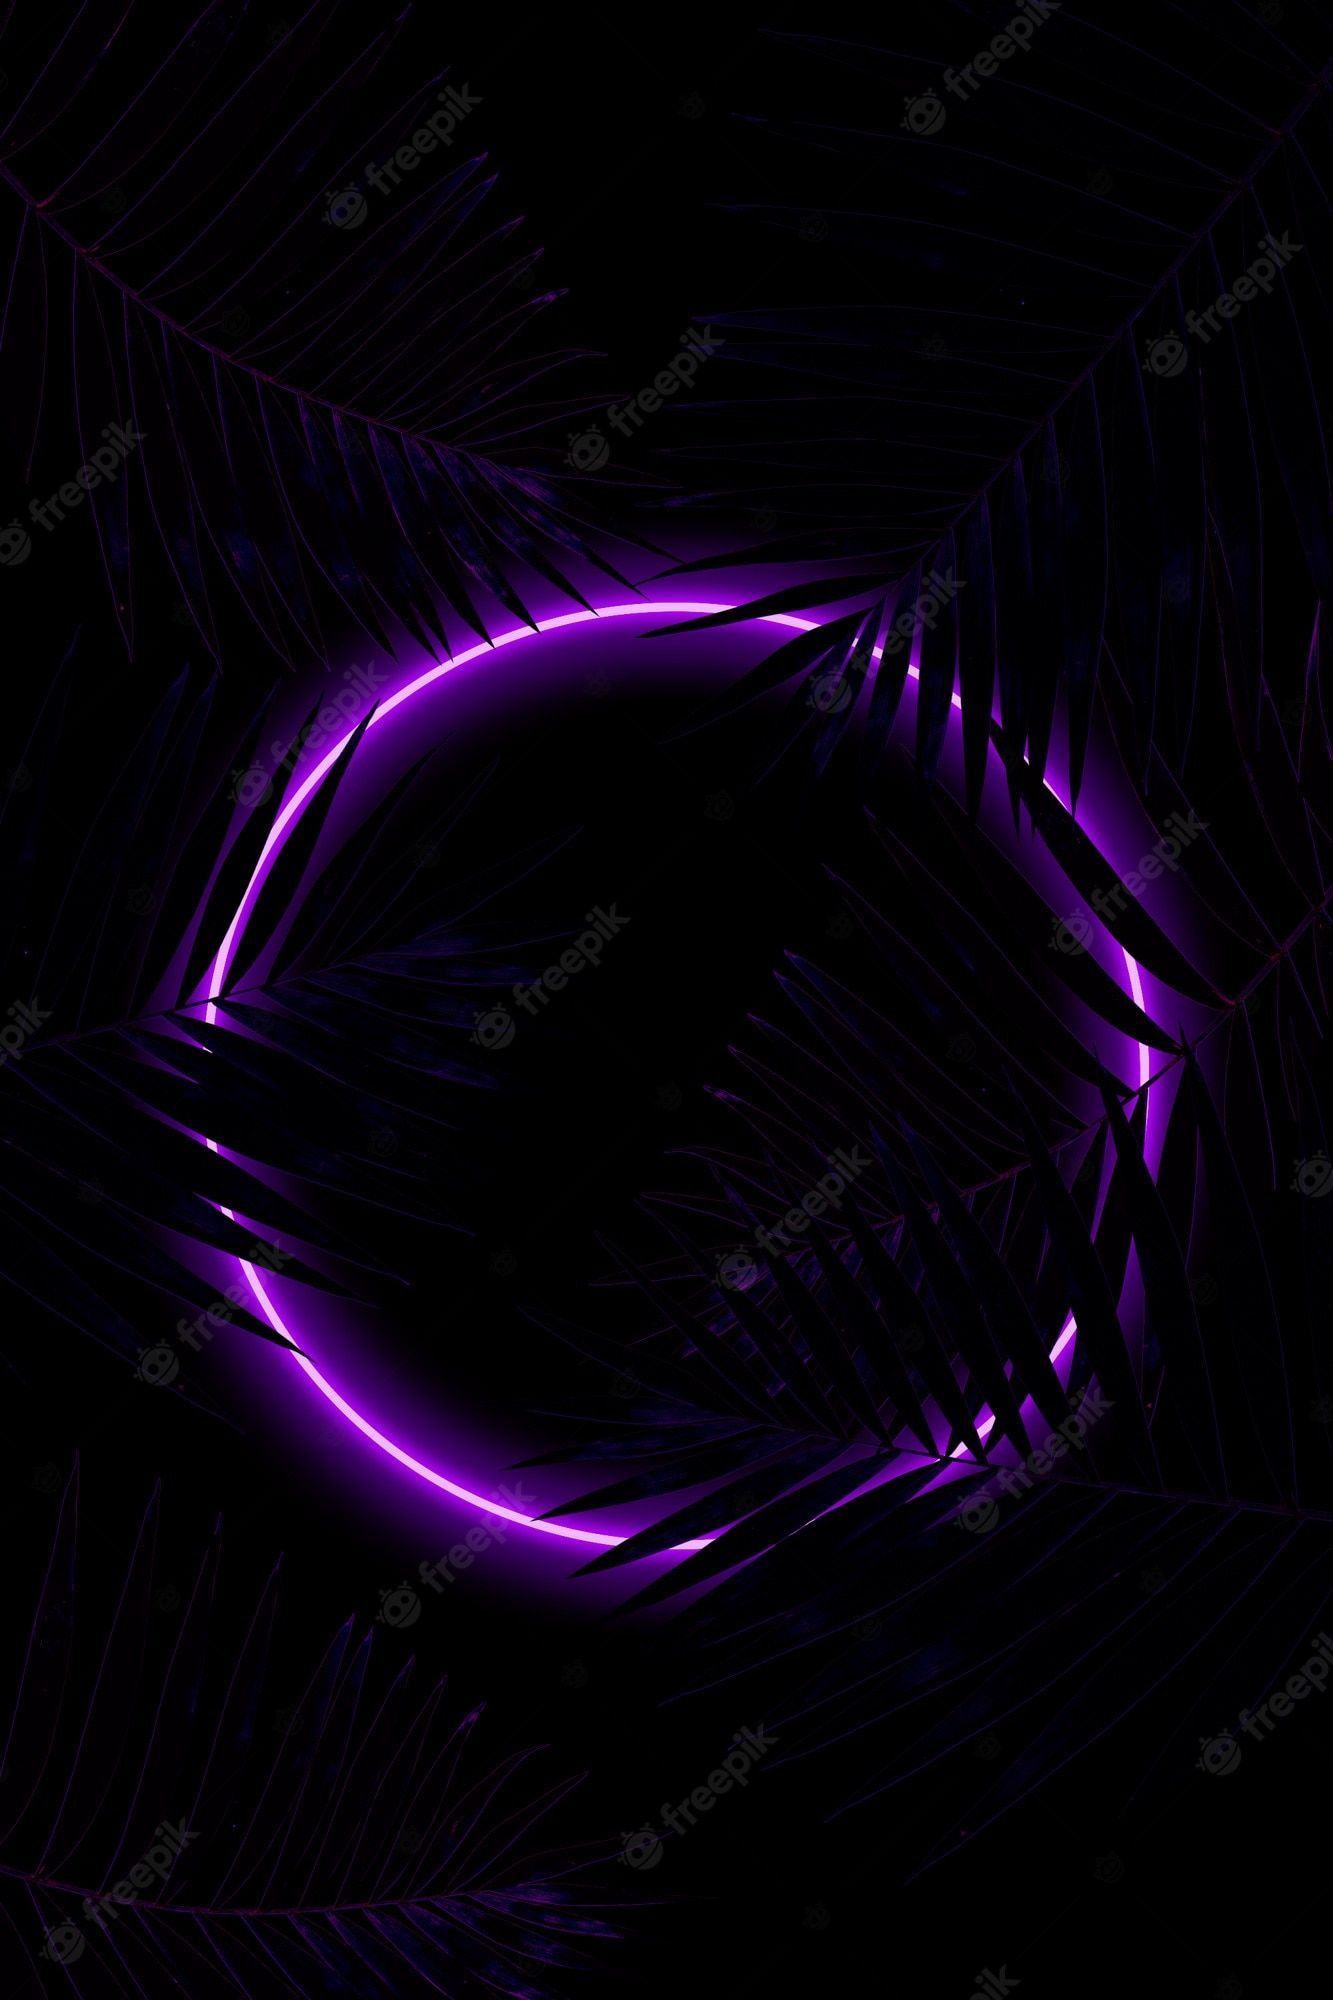 Premium Photo. Luminous circle. synth wave, retro wave, vaporwave futuristic aesthetics. glowing neon style. horizontal wallpaper, background. stylish flyer for ad, offer, bright colors and smoke neoned effect